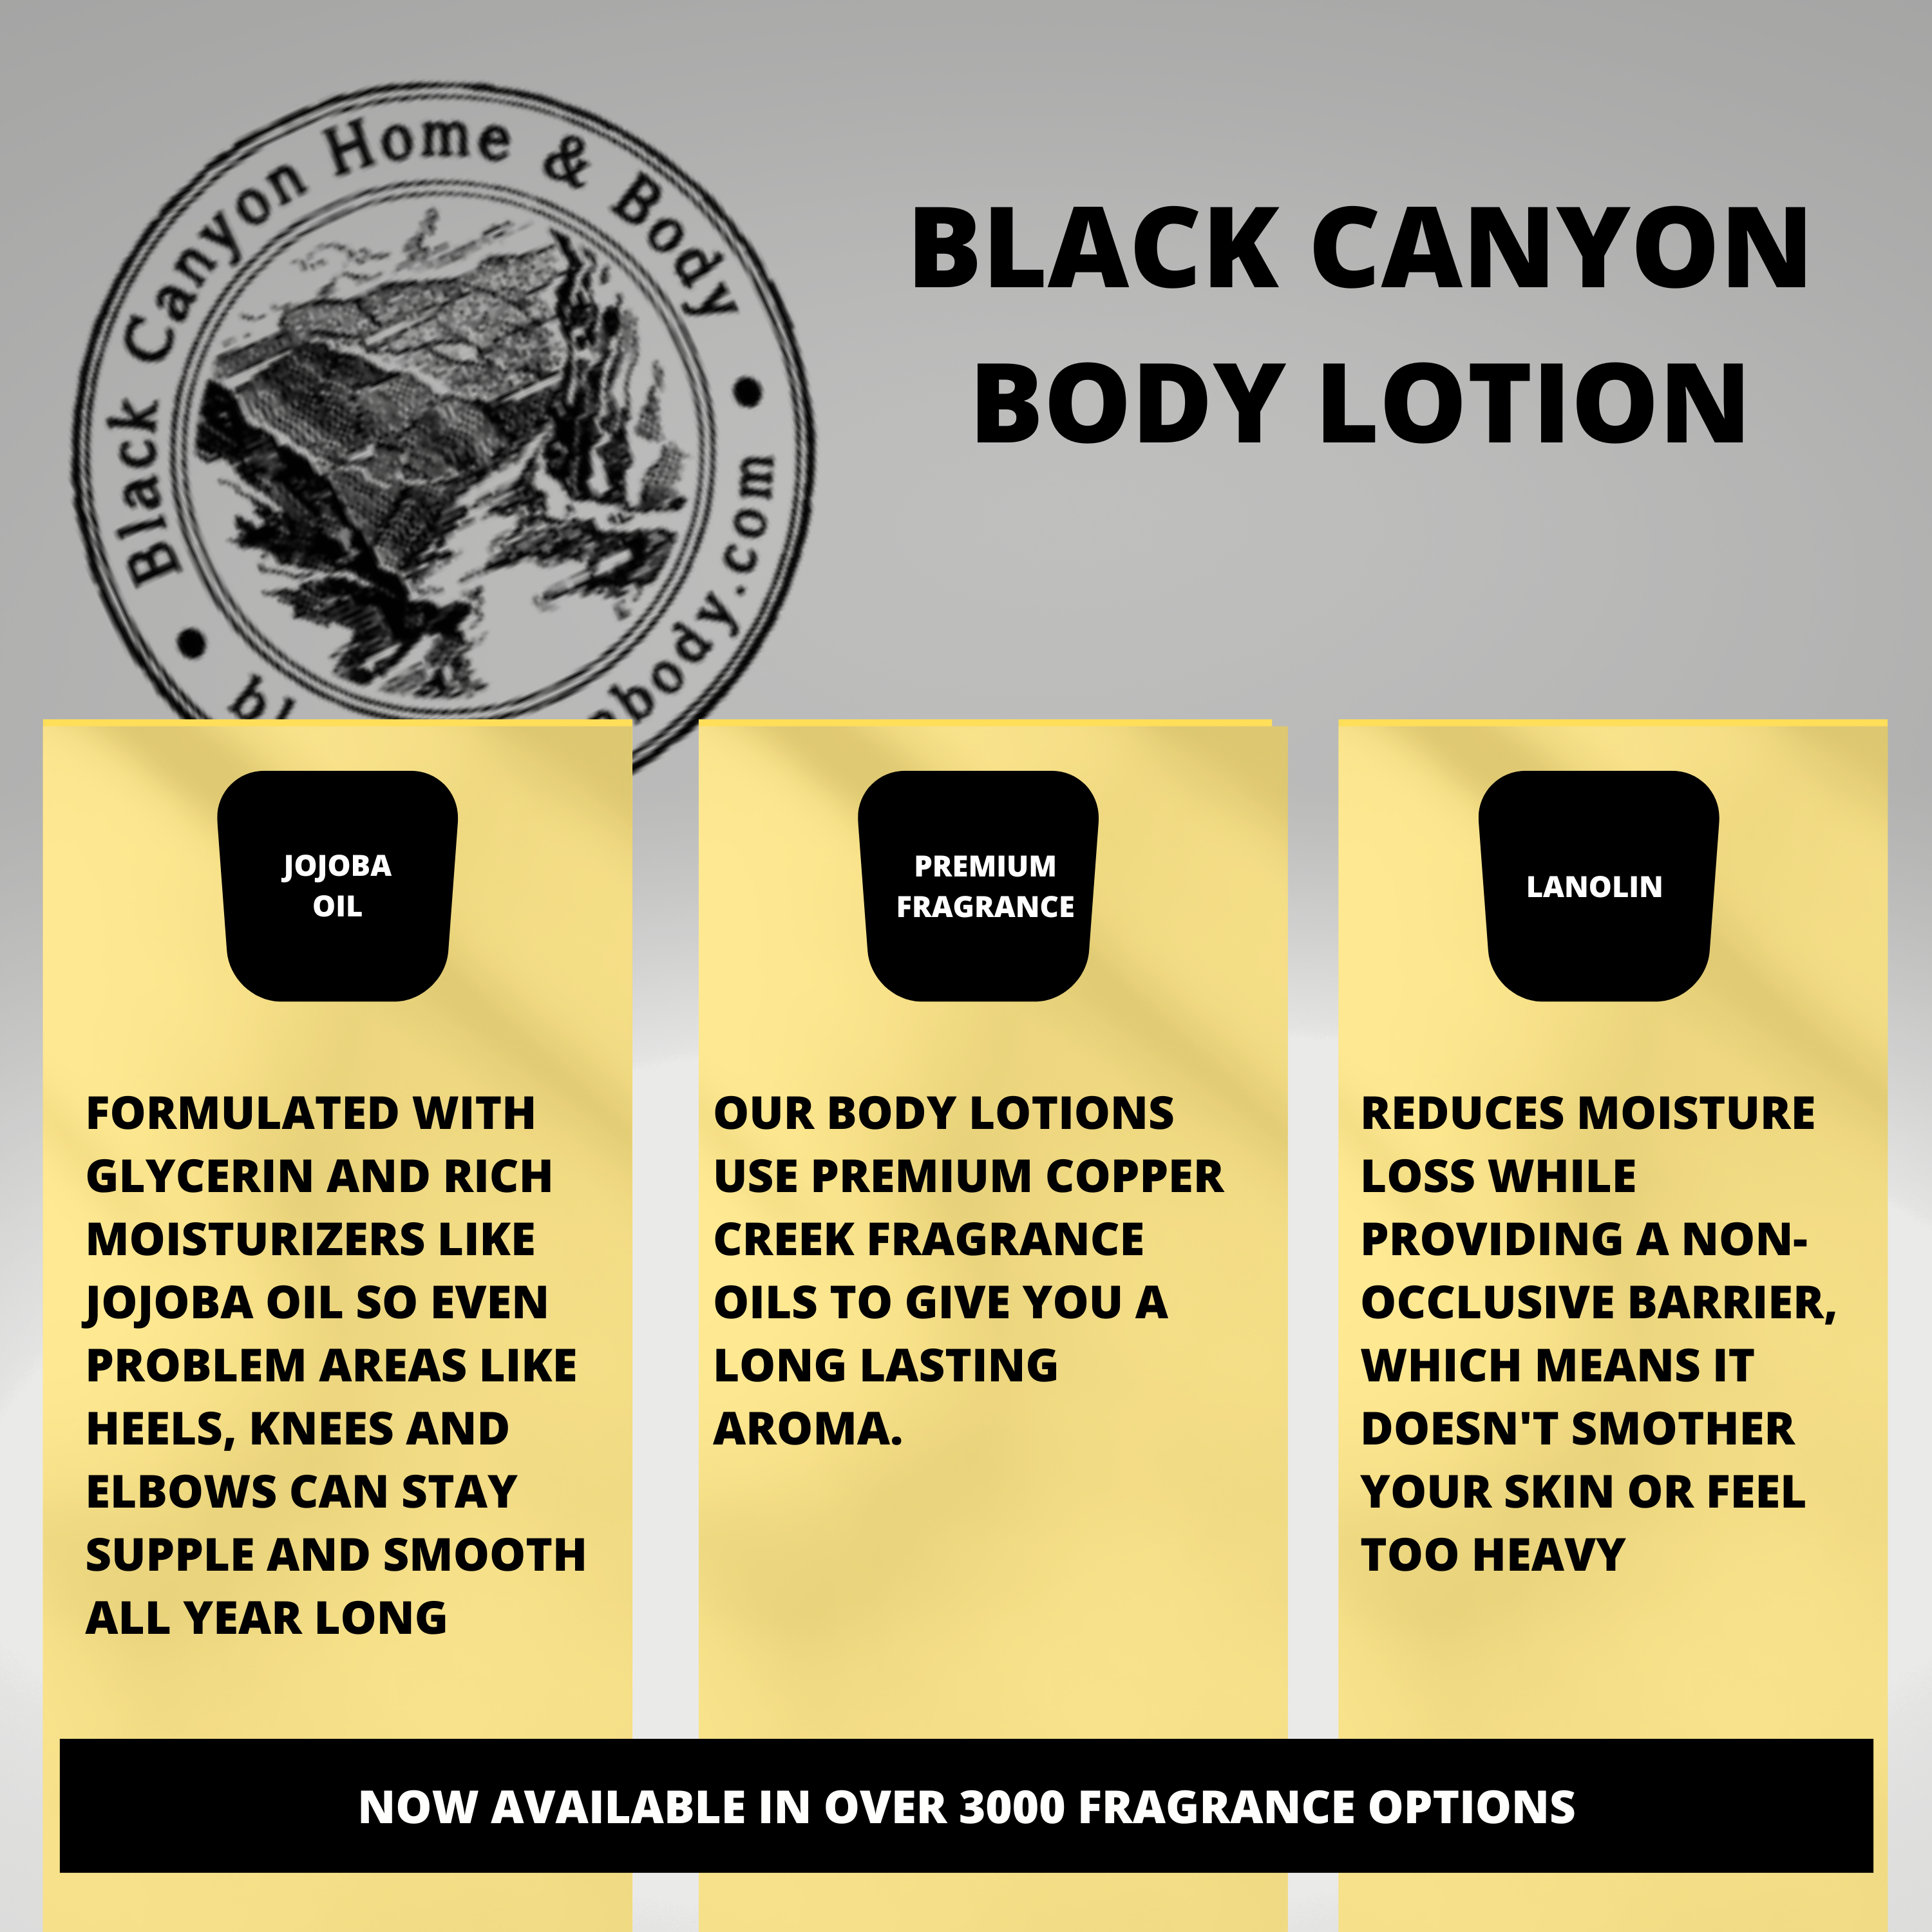 Black Canyon Spiced Plum Scented Luxury Body Lotion with Lanolin and Jojoba Oil